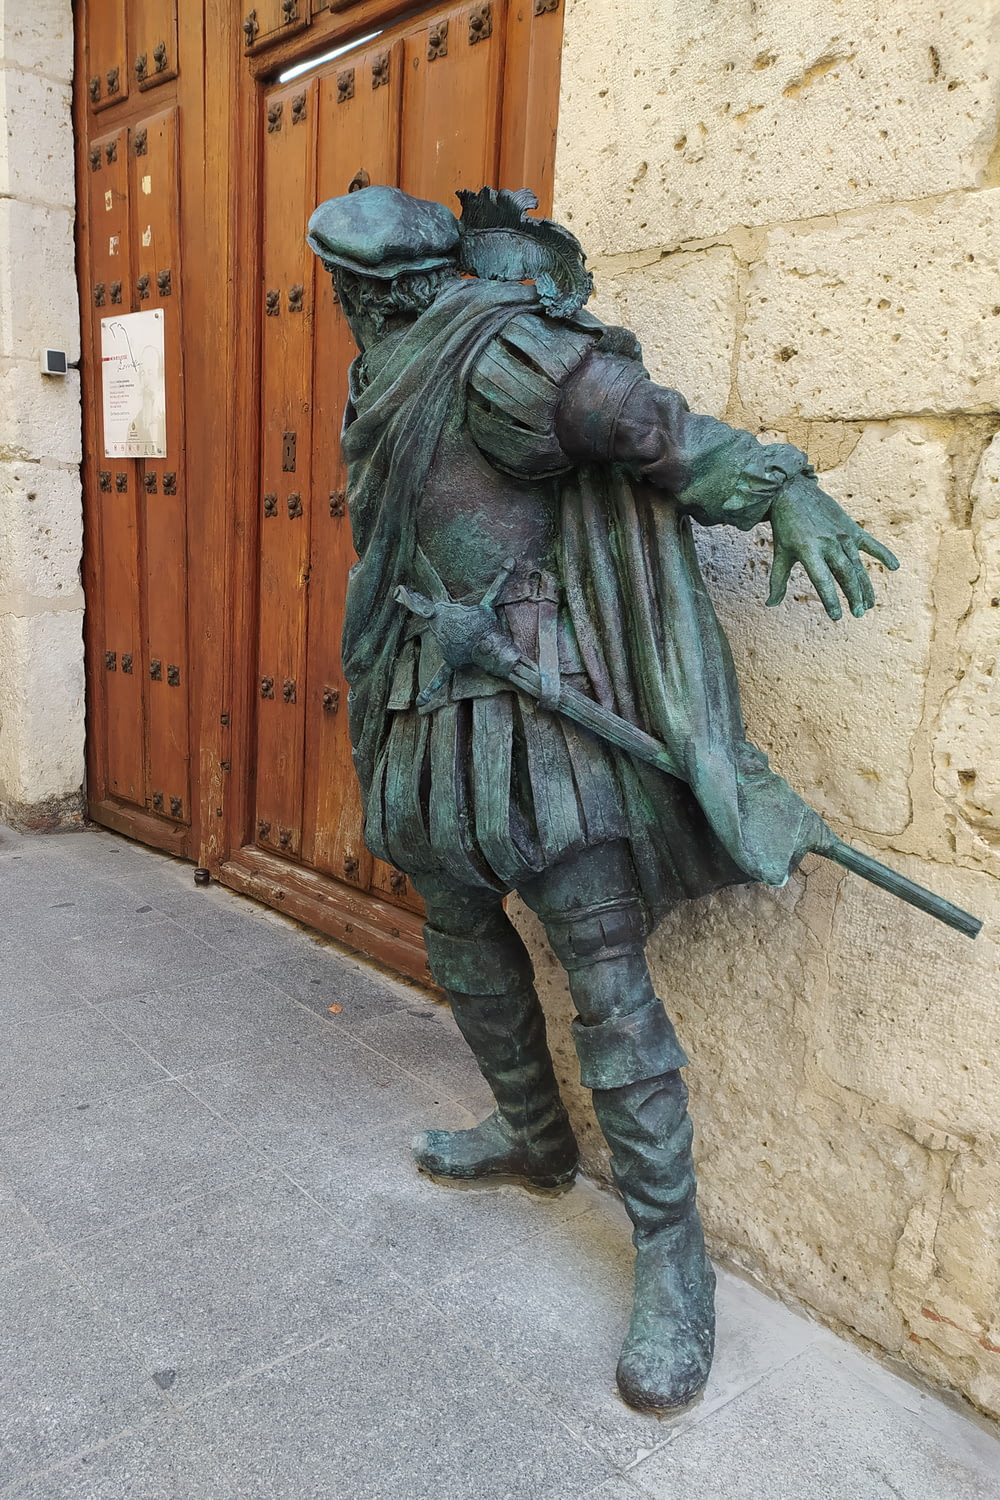 a statue of a person in armor